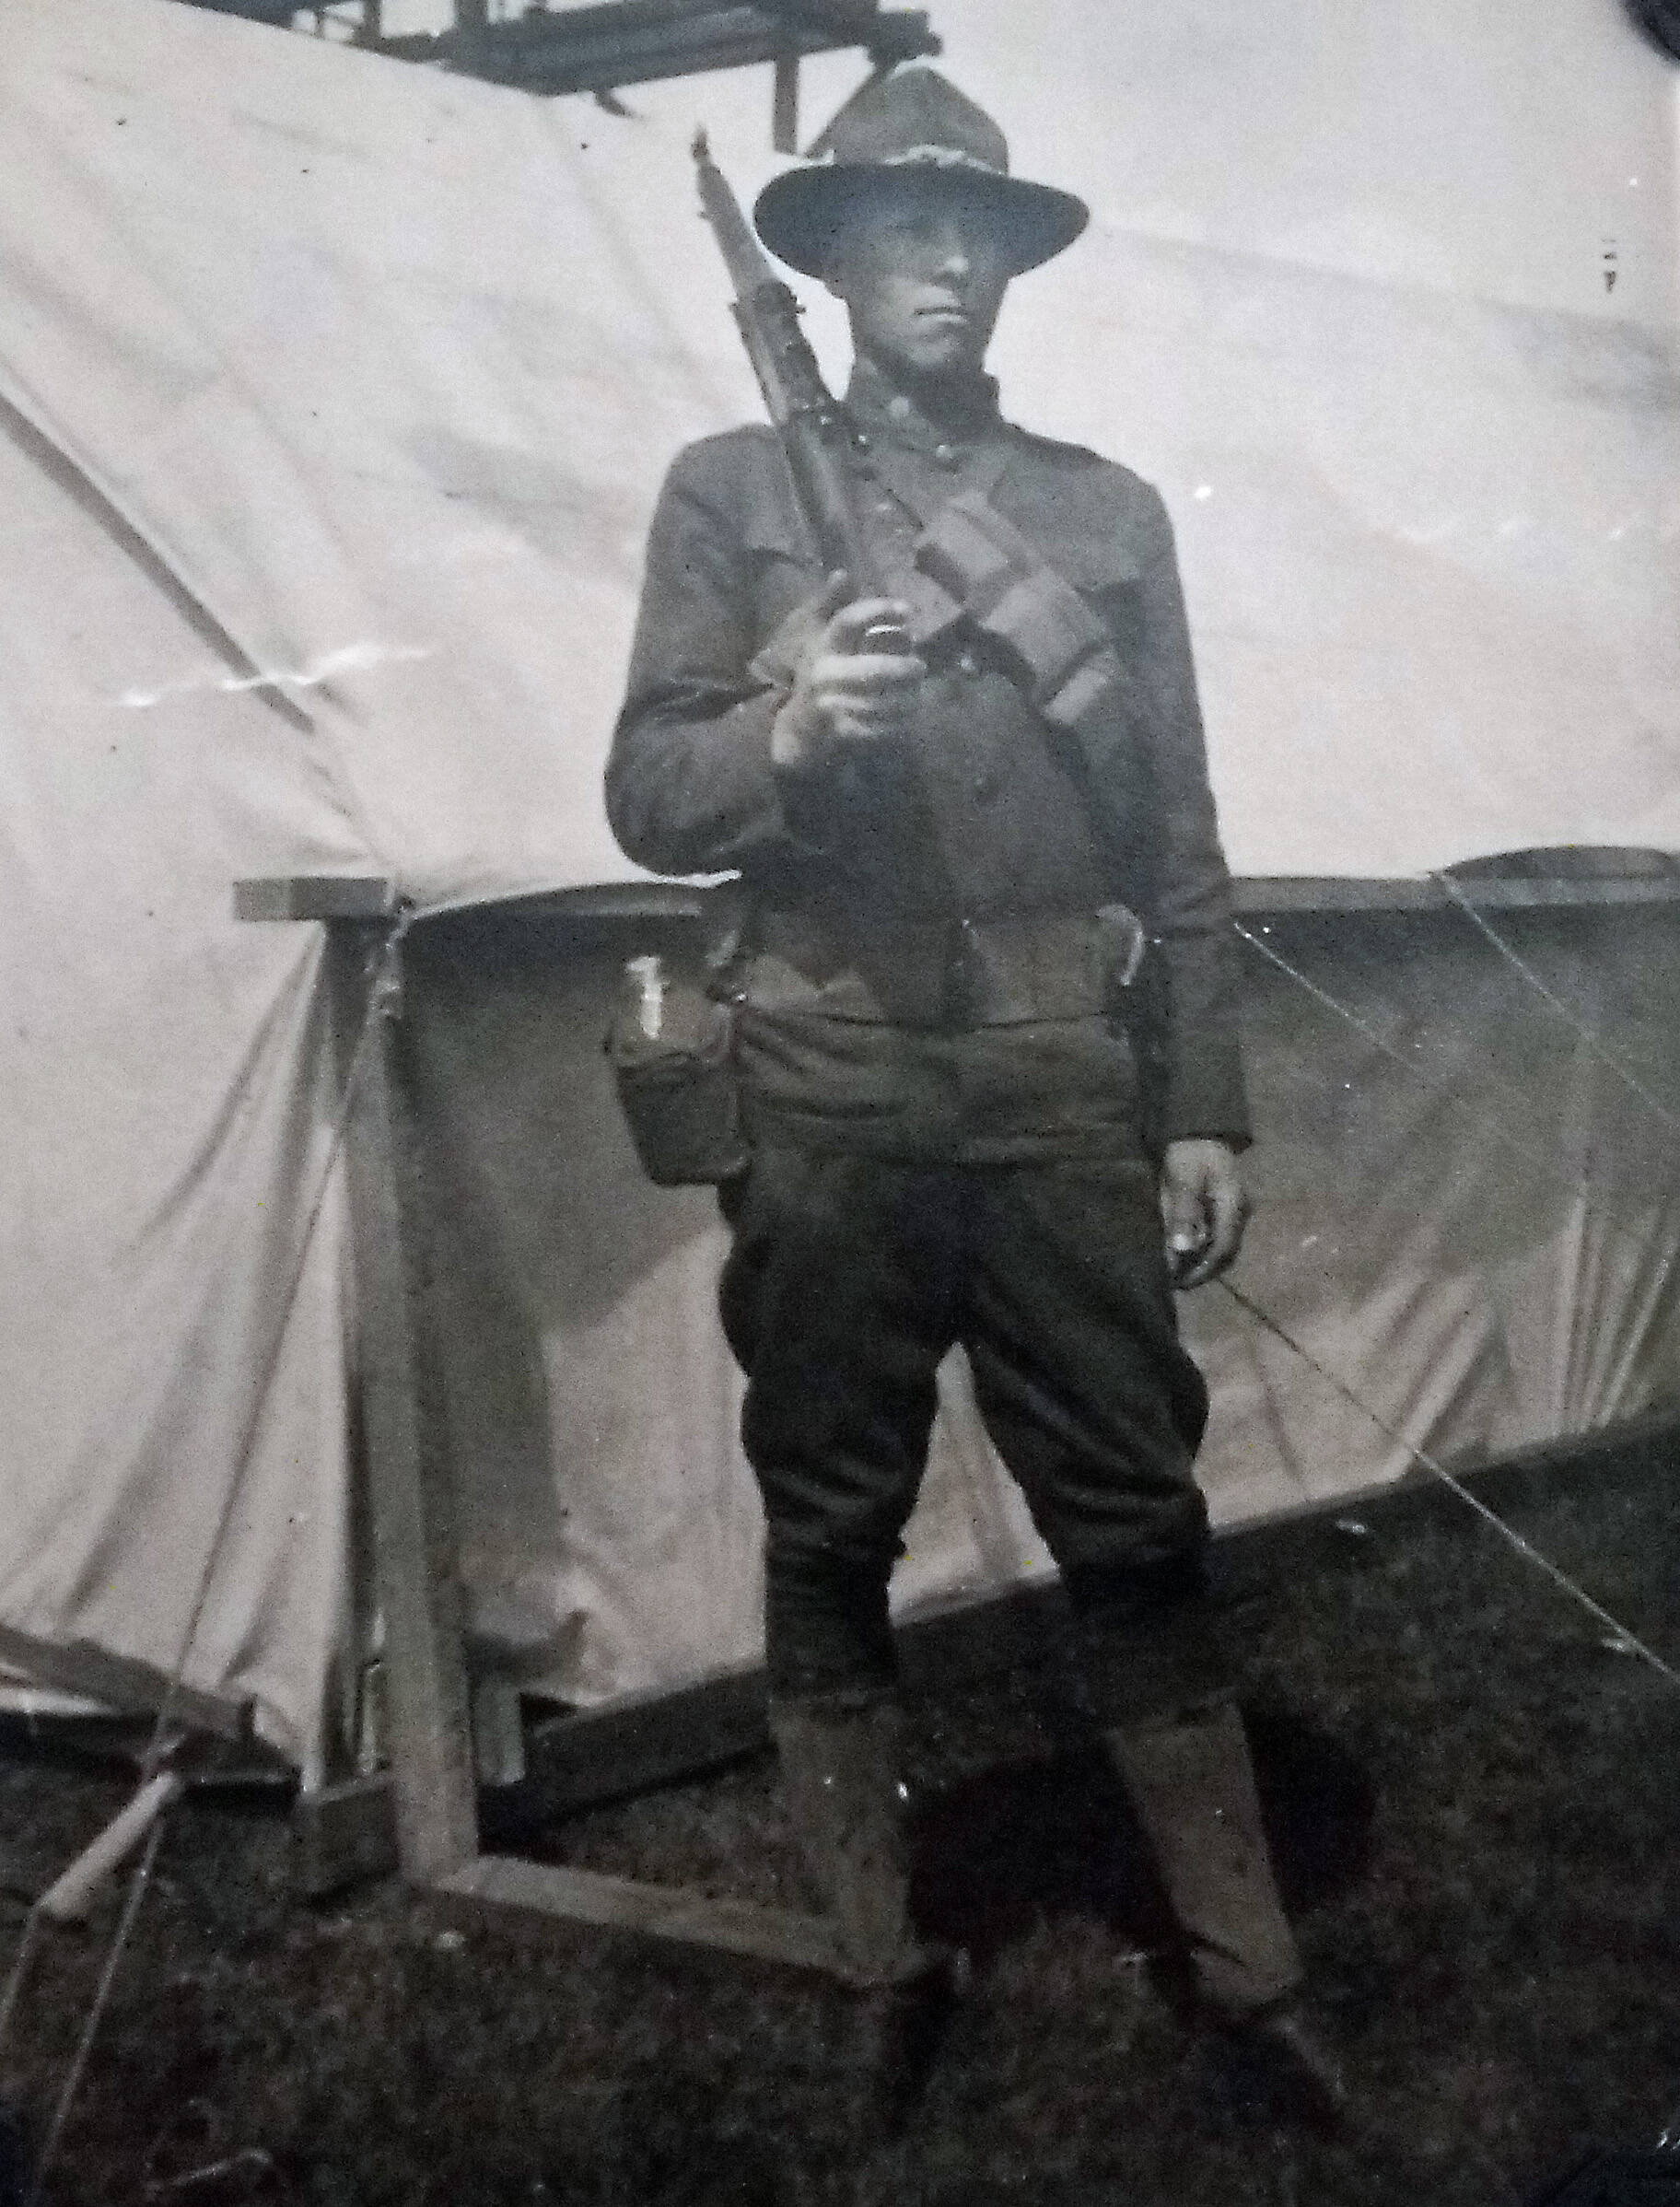 Photo courtesy of the Brennan Family Collection
John Floyd King served in the elite Rainbow Division during World War I. By the end of his tenure, he was a machine gunner fighting in France.